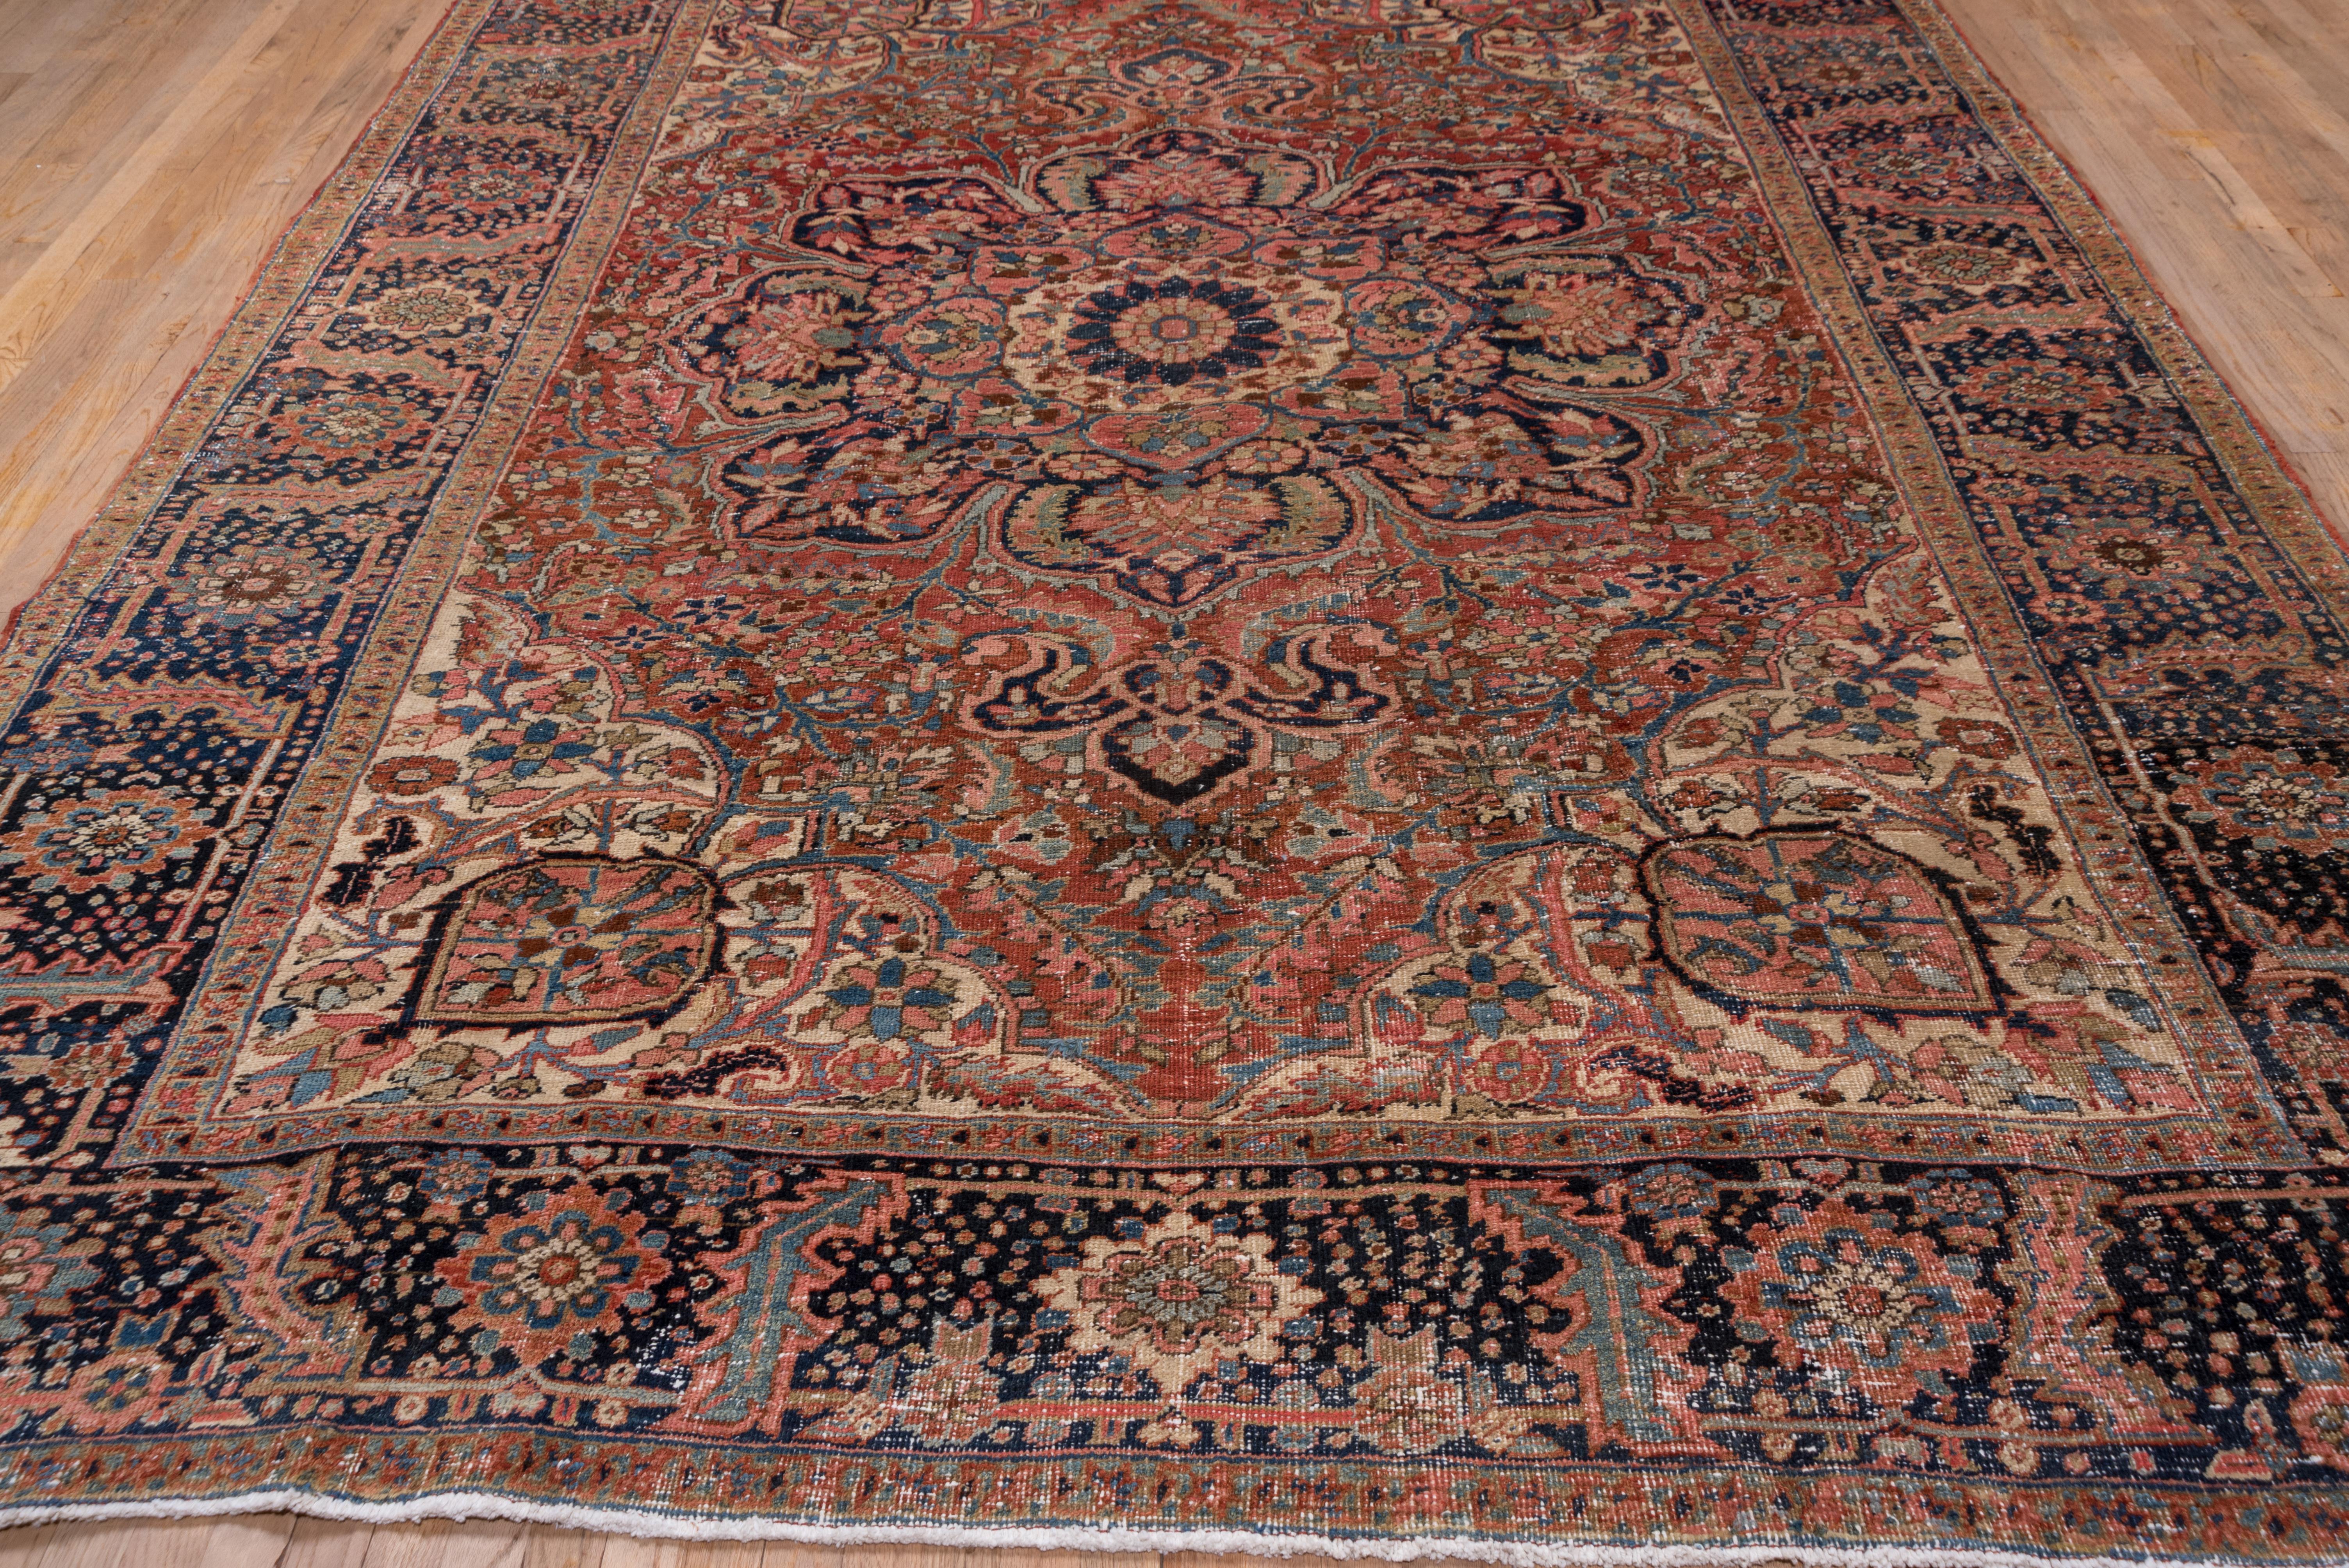 This well-colored NW Persian rustic carpet shows a deeply eight lobed navy medallion with an ivory round rosette center. The red field has classic semi-geometric flowers and leaves, and there are ivory corners with projecting pointed ovals and a